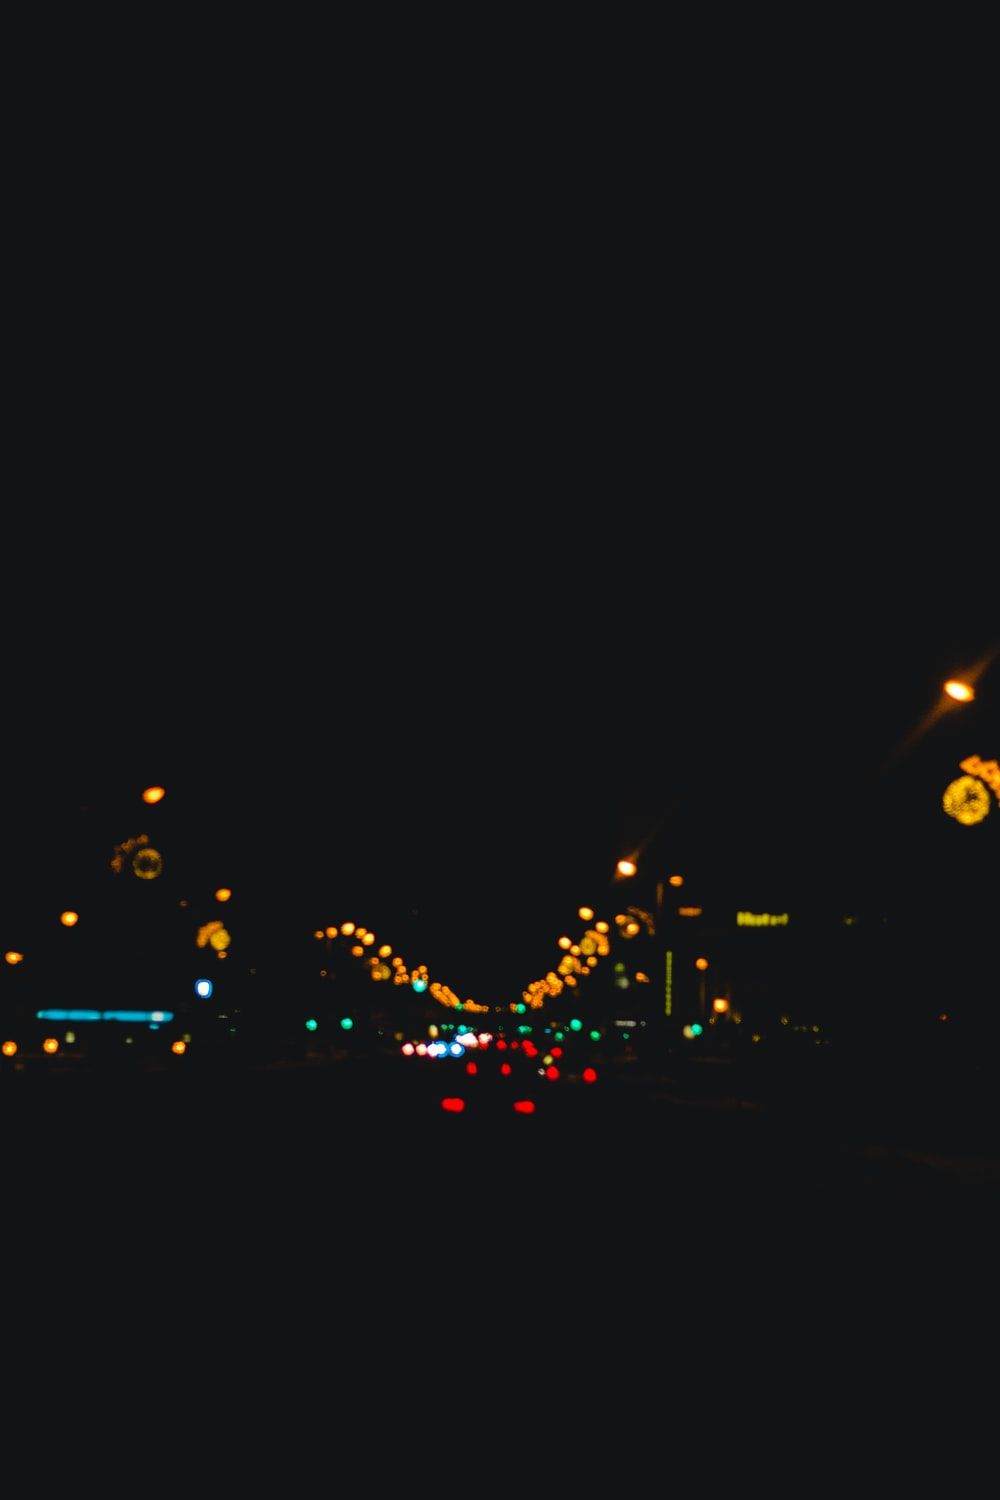 Late Night Drive Picture. Download Free Image